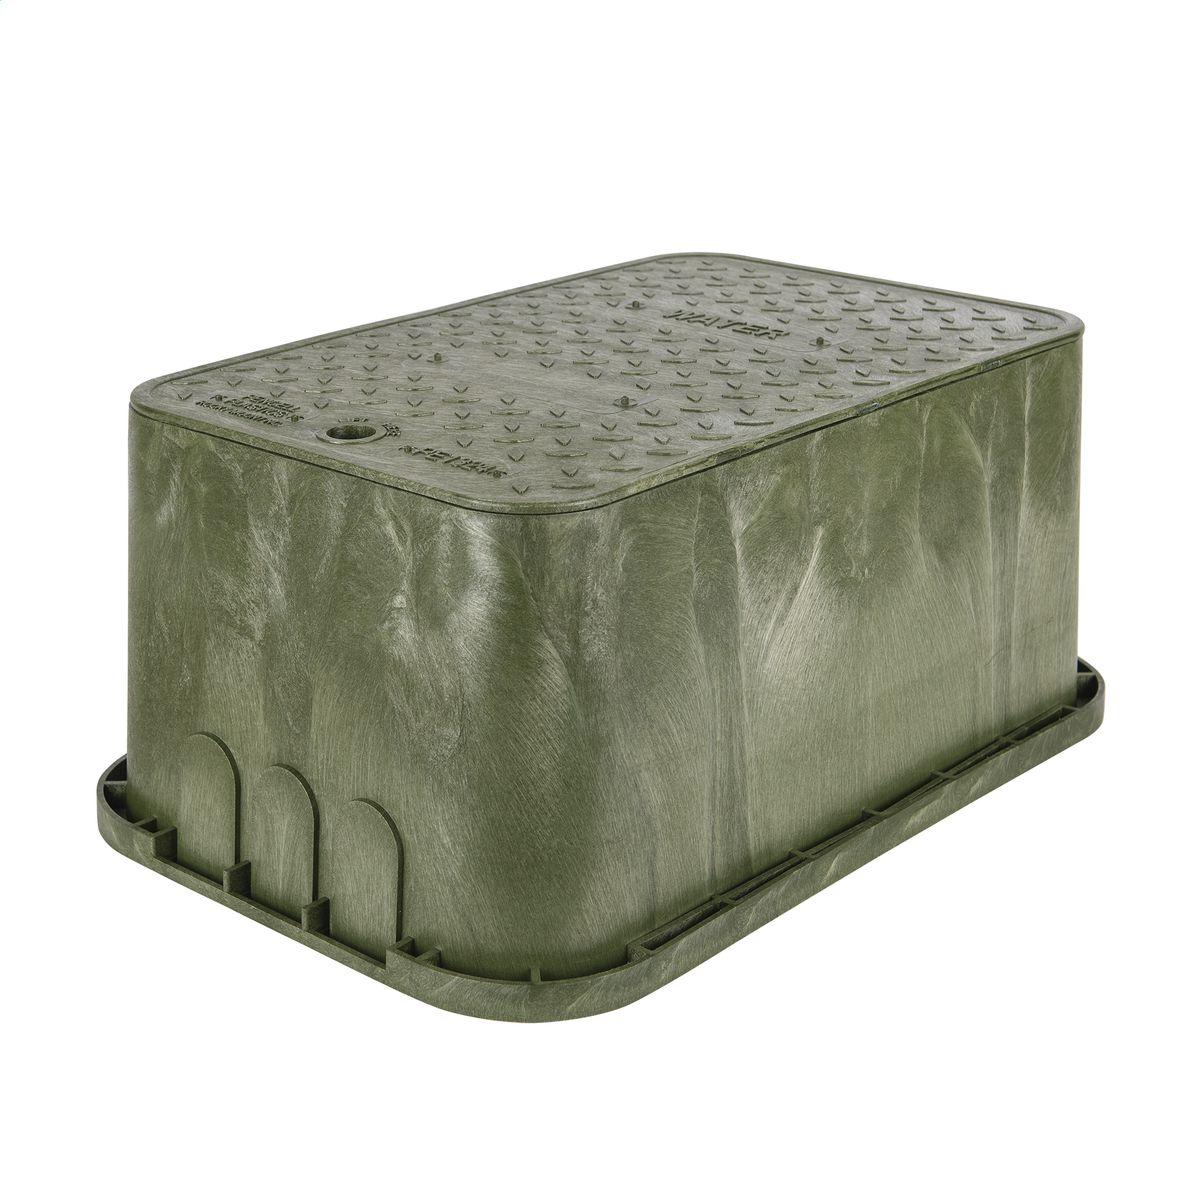 Hubbell PE1730HDH00009 Assembly, Green, HDPE Box and Cover, Pedestrian, 17" x 30" x 12", Bolt Down 